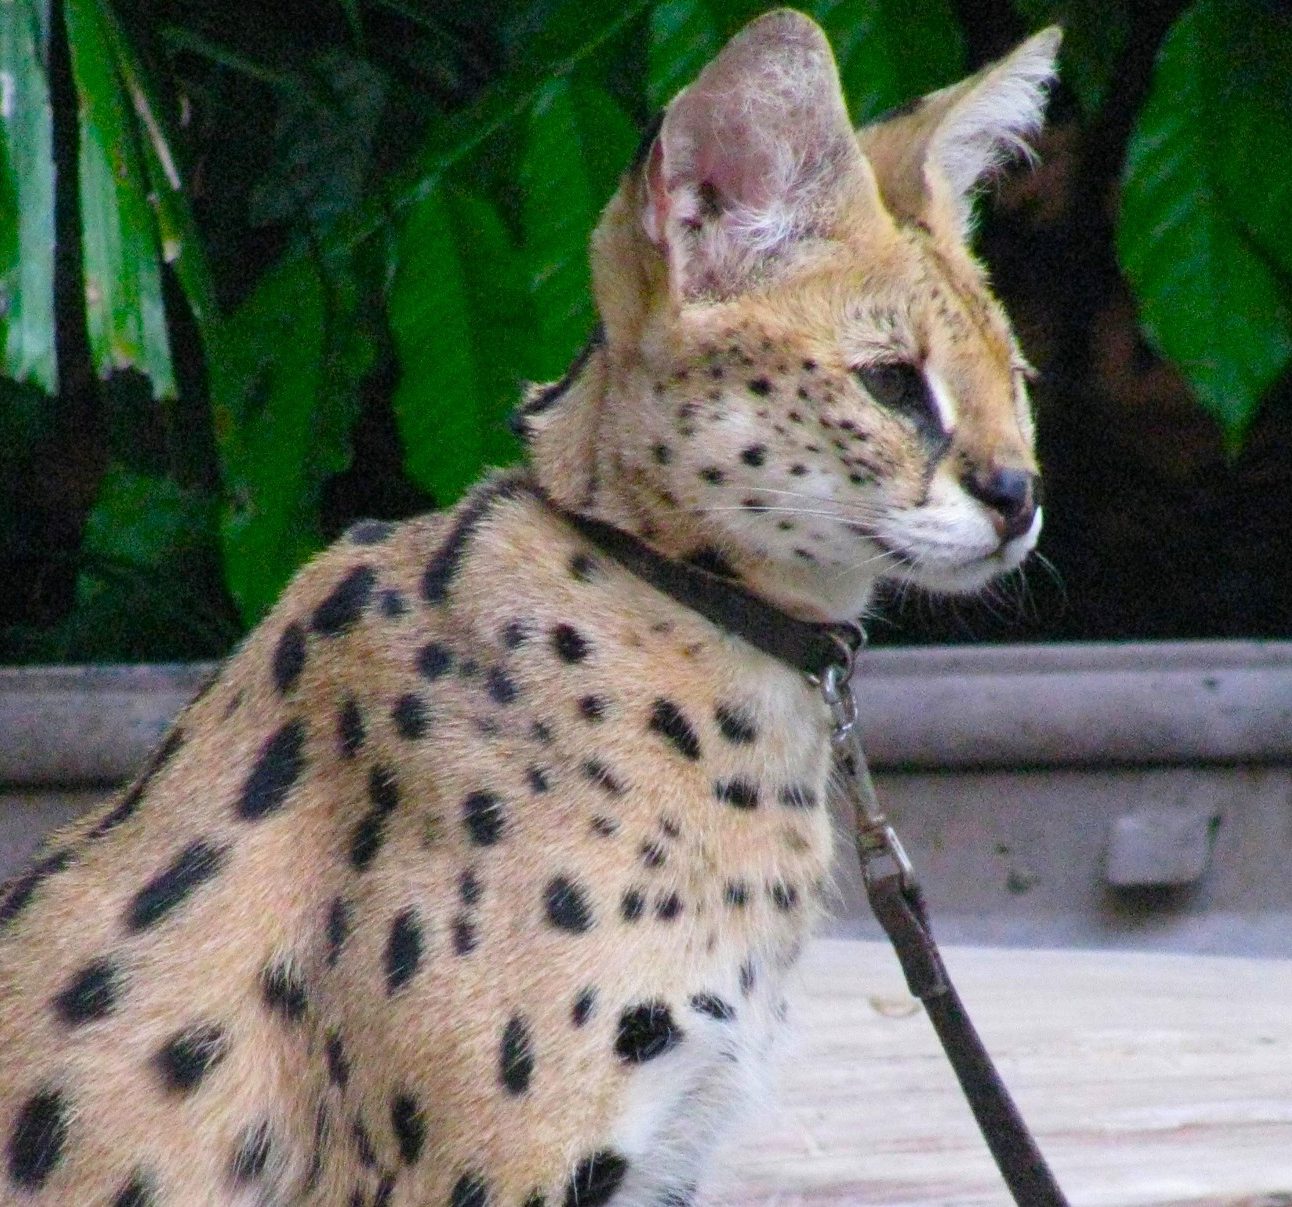 A serval cat wearing a collar and lead